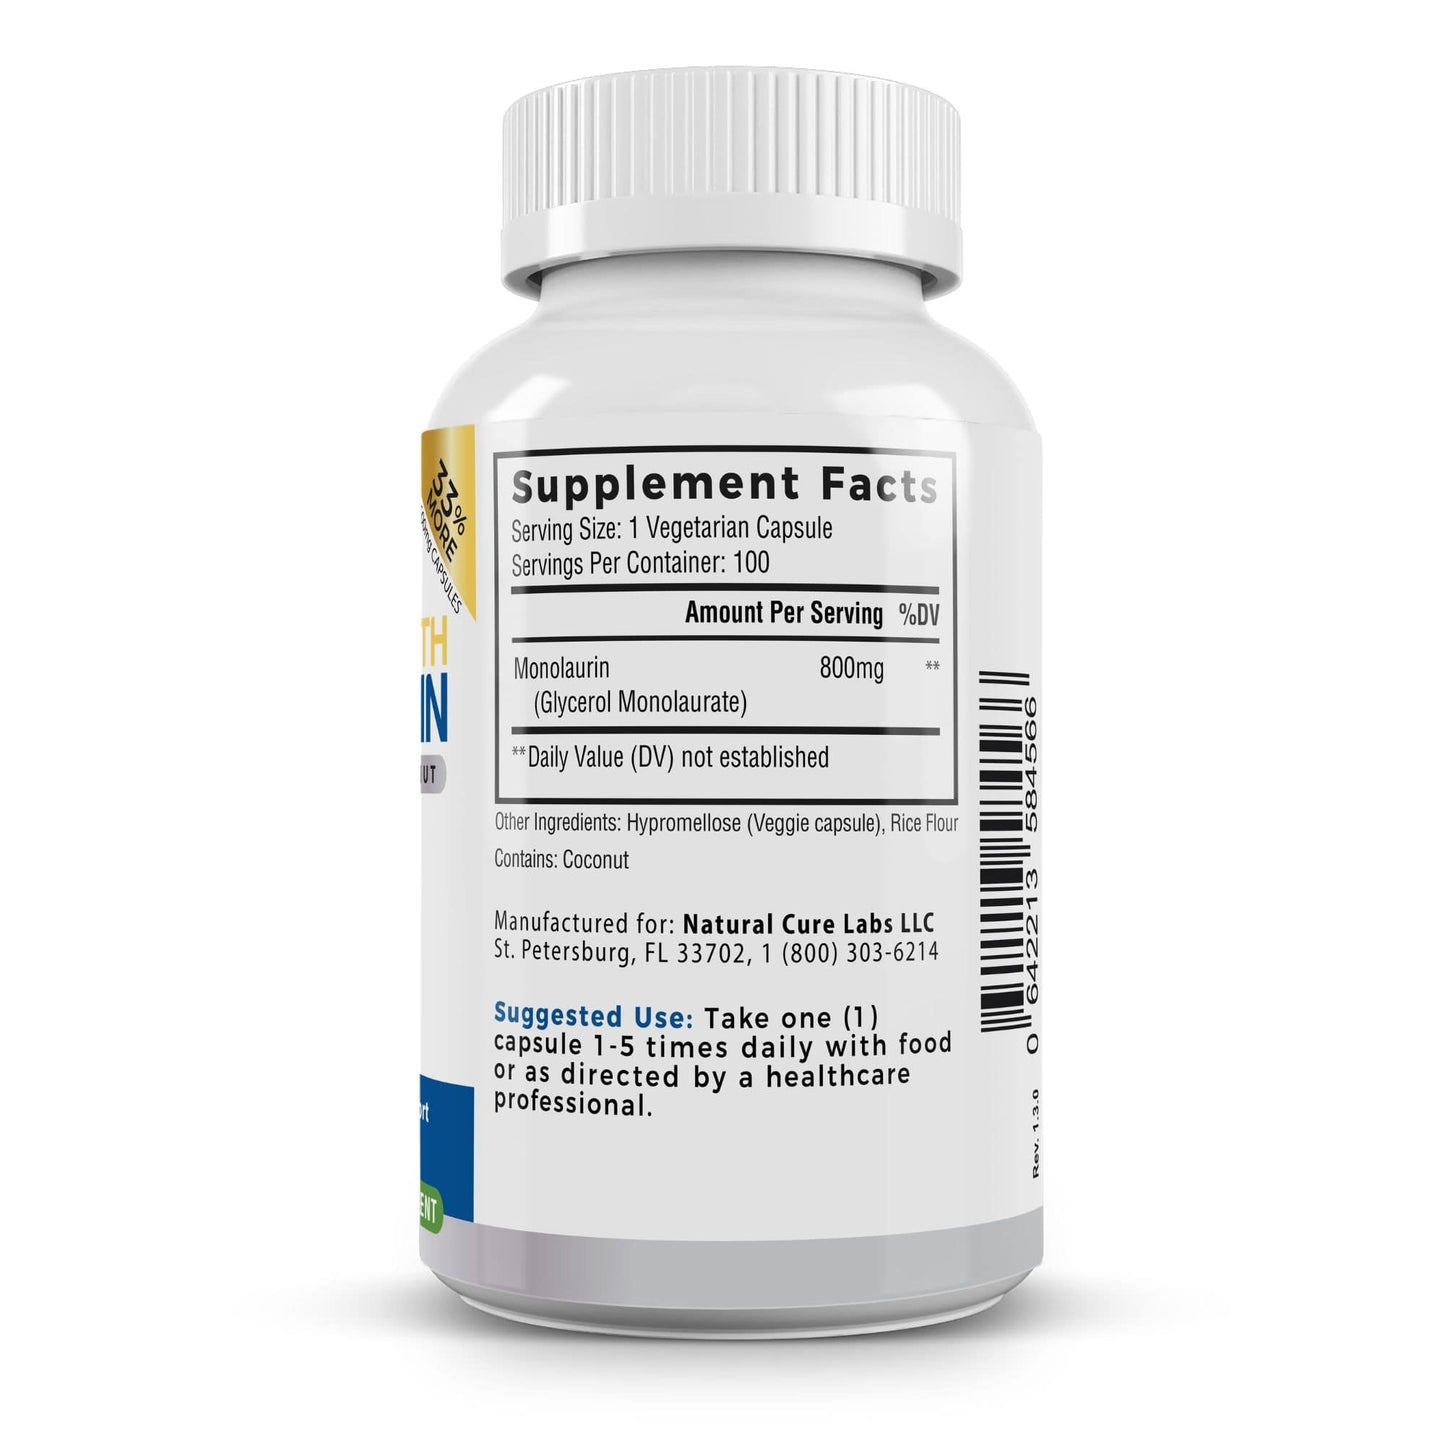 Right side of the Natural Cure Labs Extra Strength Monolaurin bottle showing supplement facts, including a serving size of one vegetarian capsule and the ingredients, with 800mg of Monolaurin per serving.